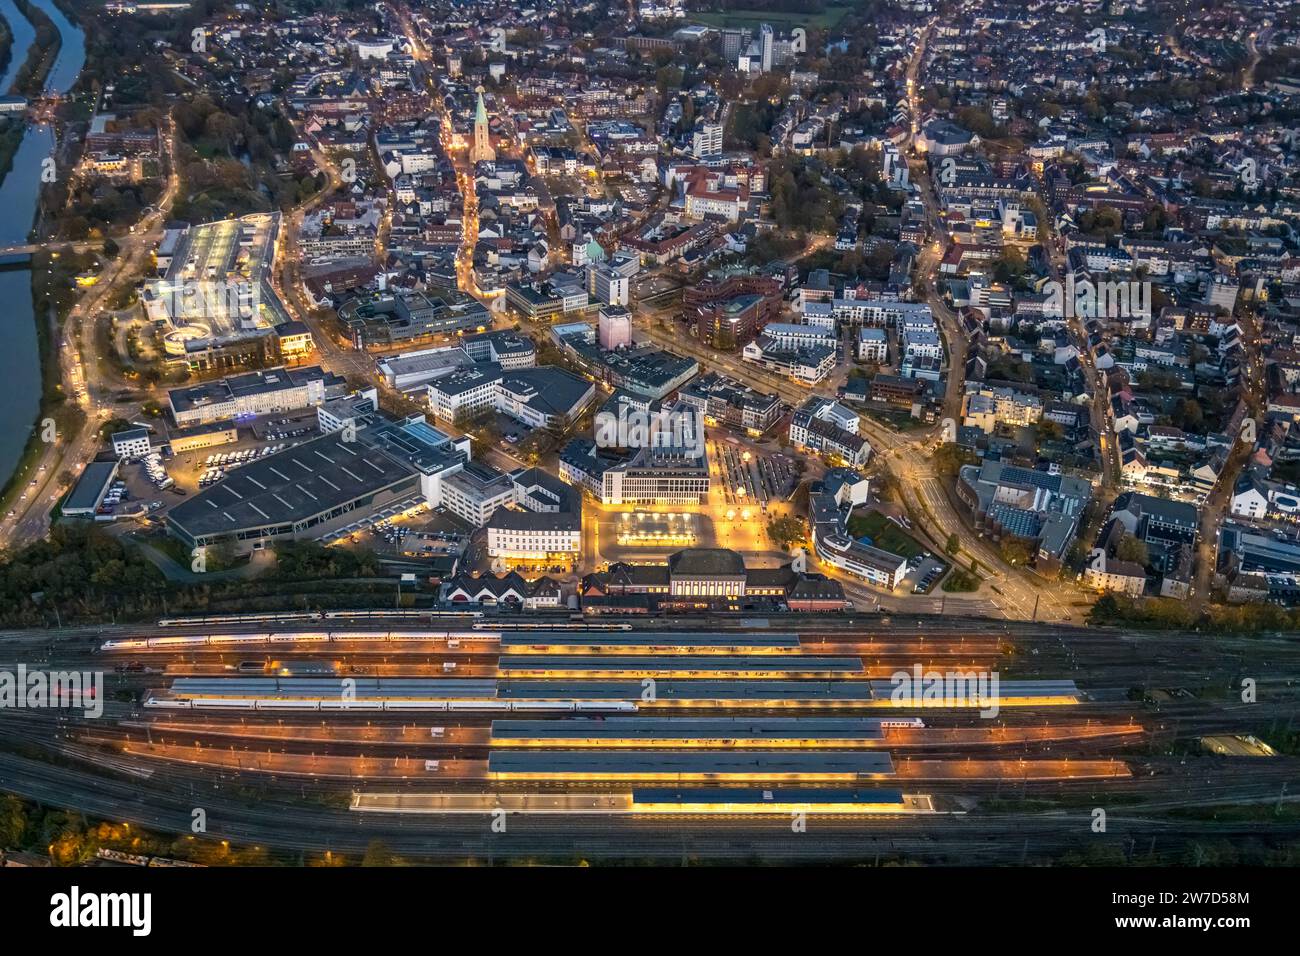 Aerial view, night shot, central station with station forecourt and city with Allee-Center shopping center, view to the evang. Pauluskirche, center, H Stock Photo